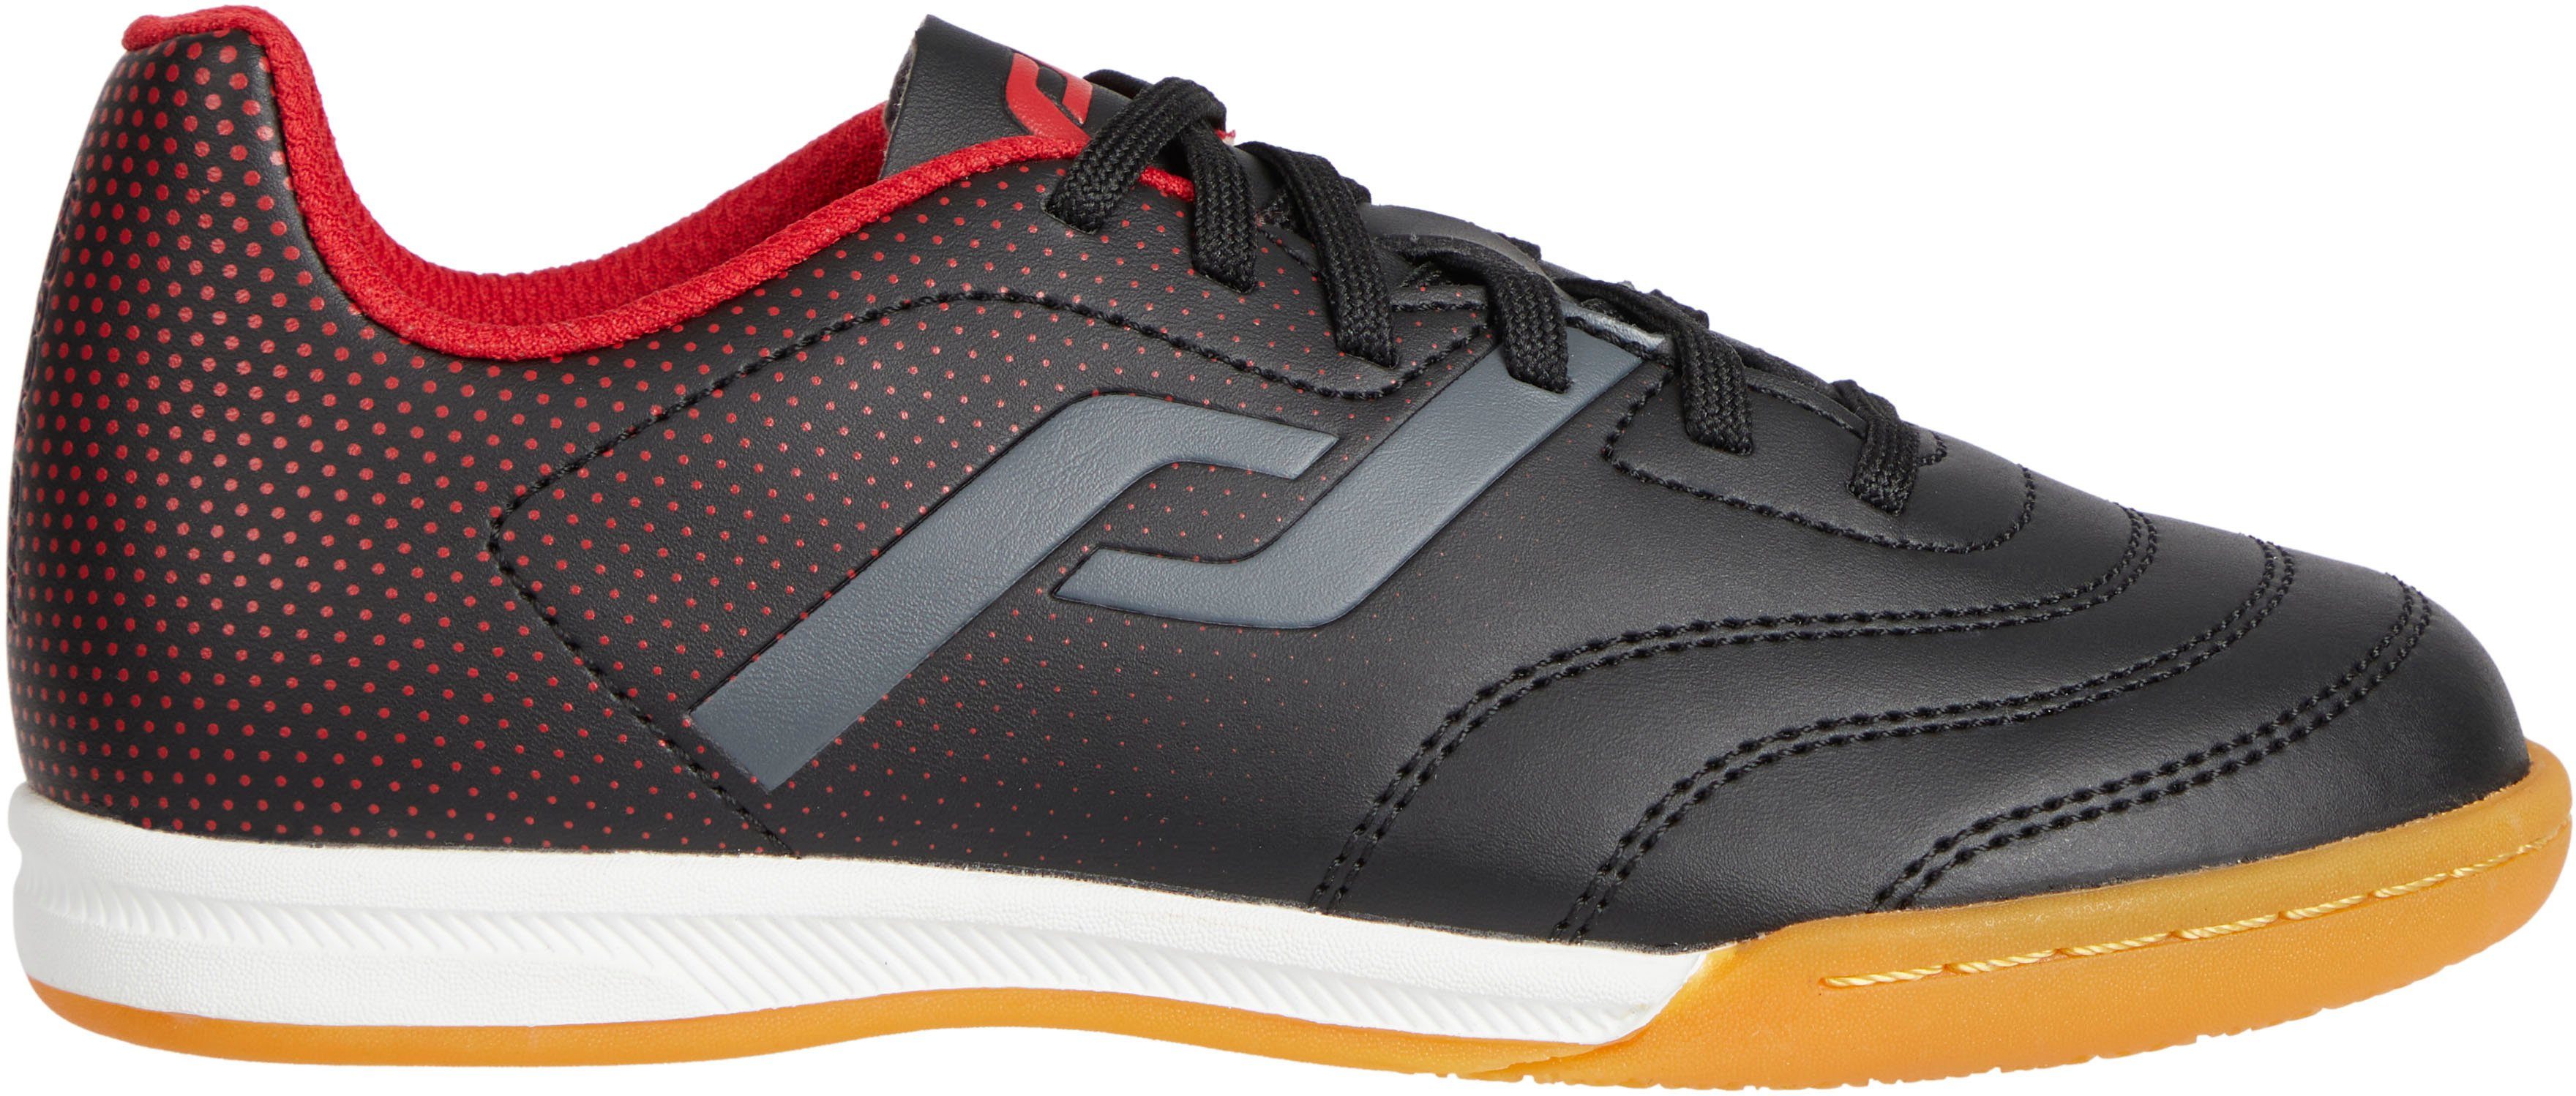 III Fußballschuh JR BLACK/RED/ANTHRACITE Pro Ind IN Touch Classic